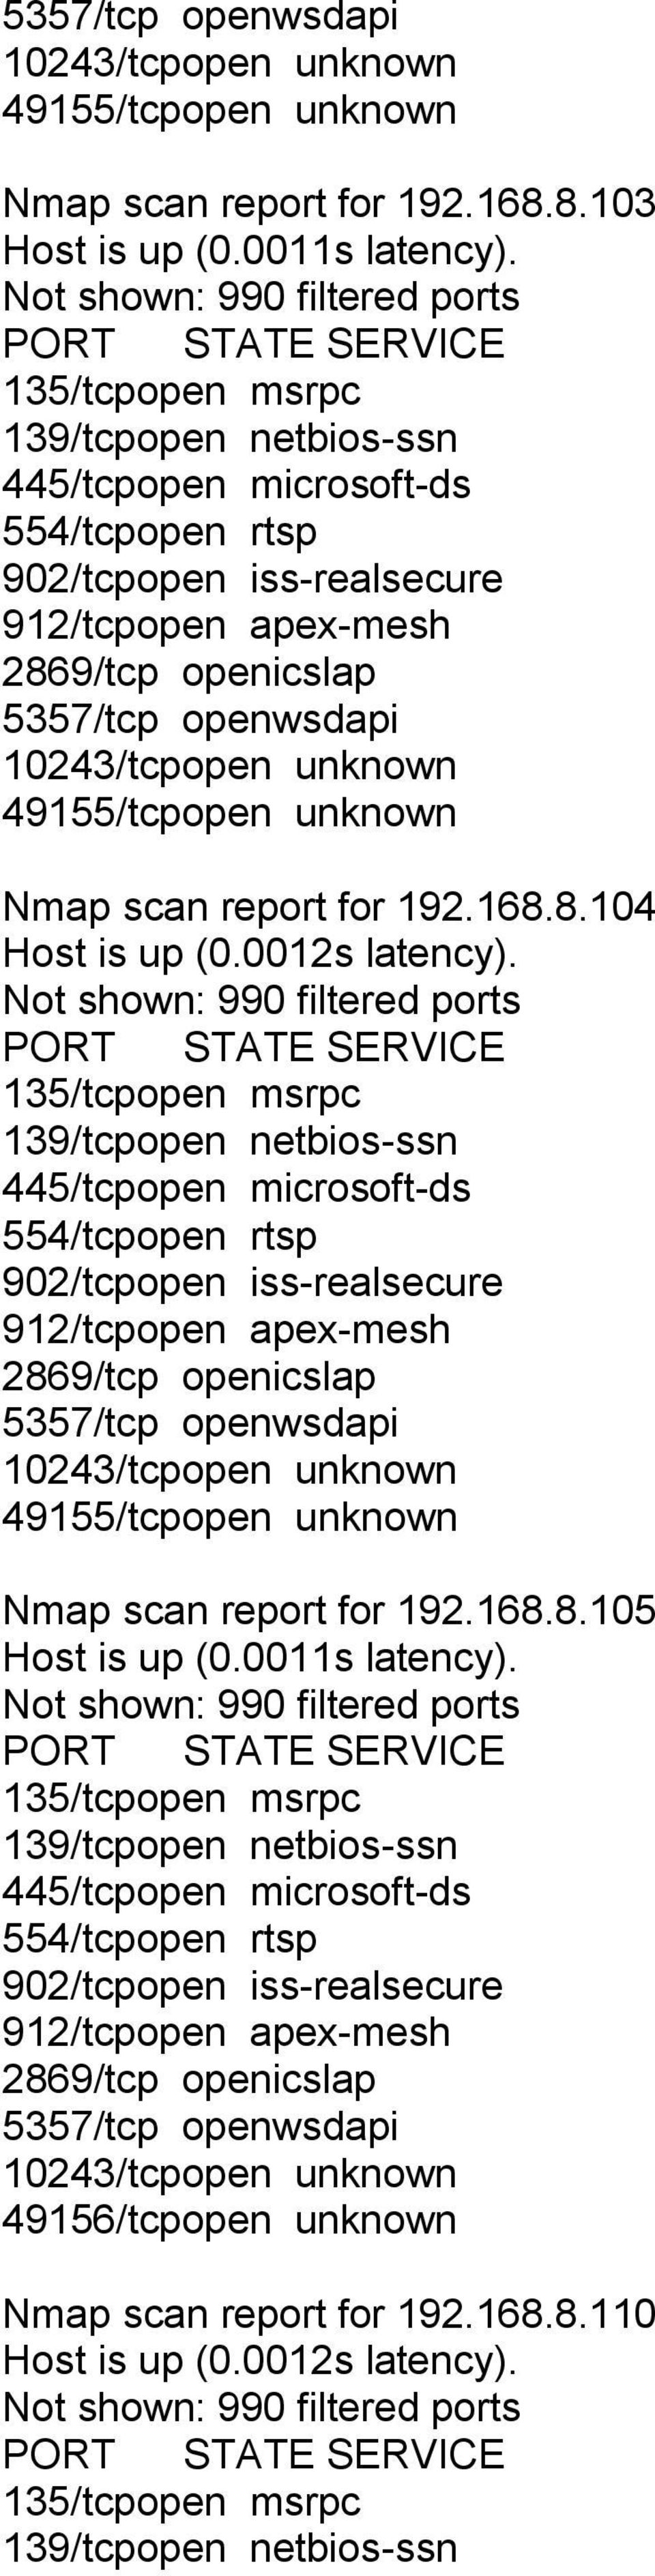 Nmap scan report for 192.168.8.105 Host is up (0.0011s latency).